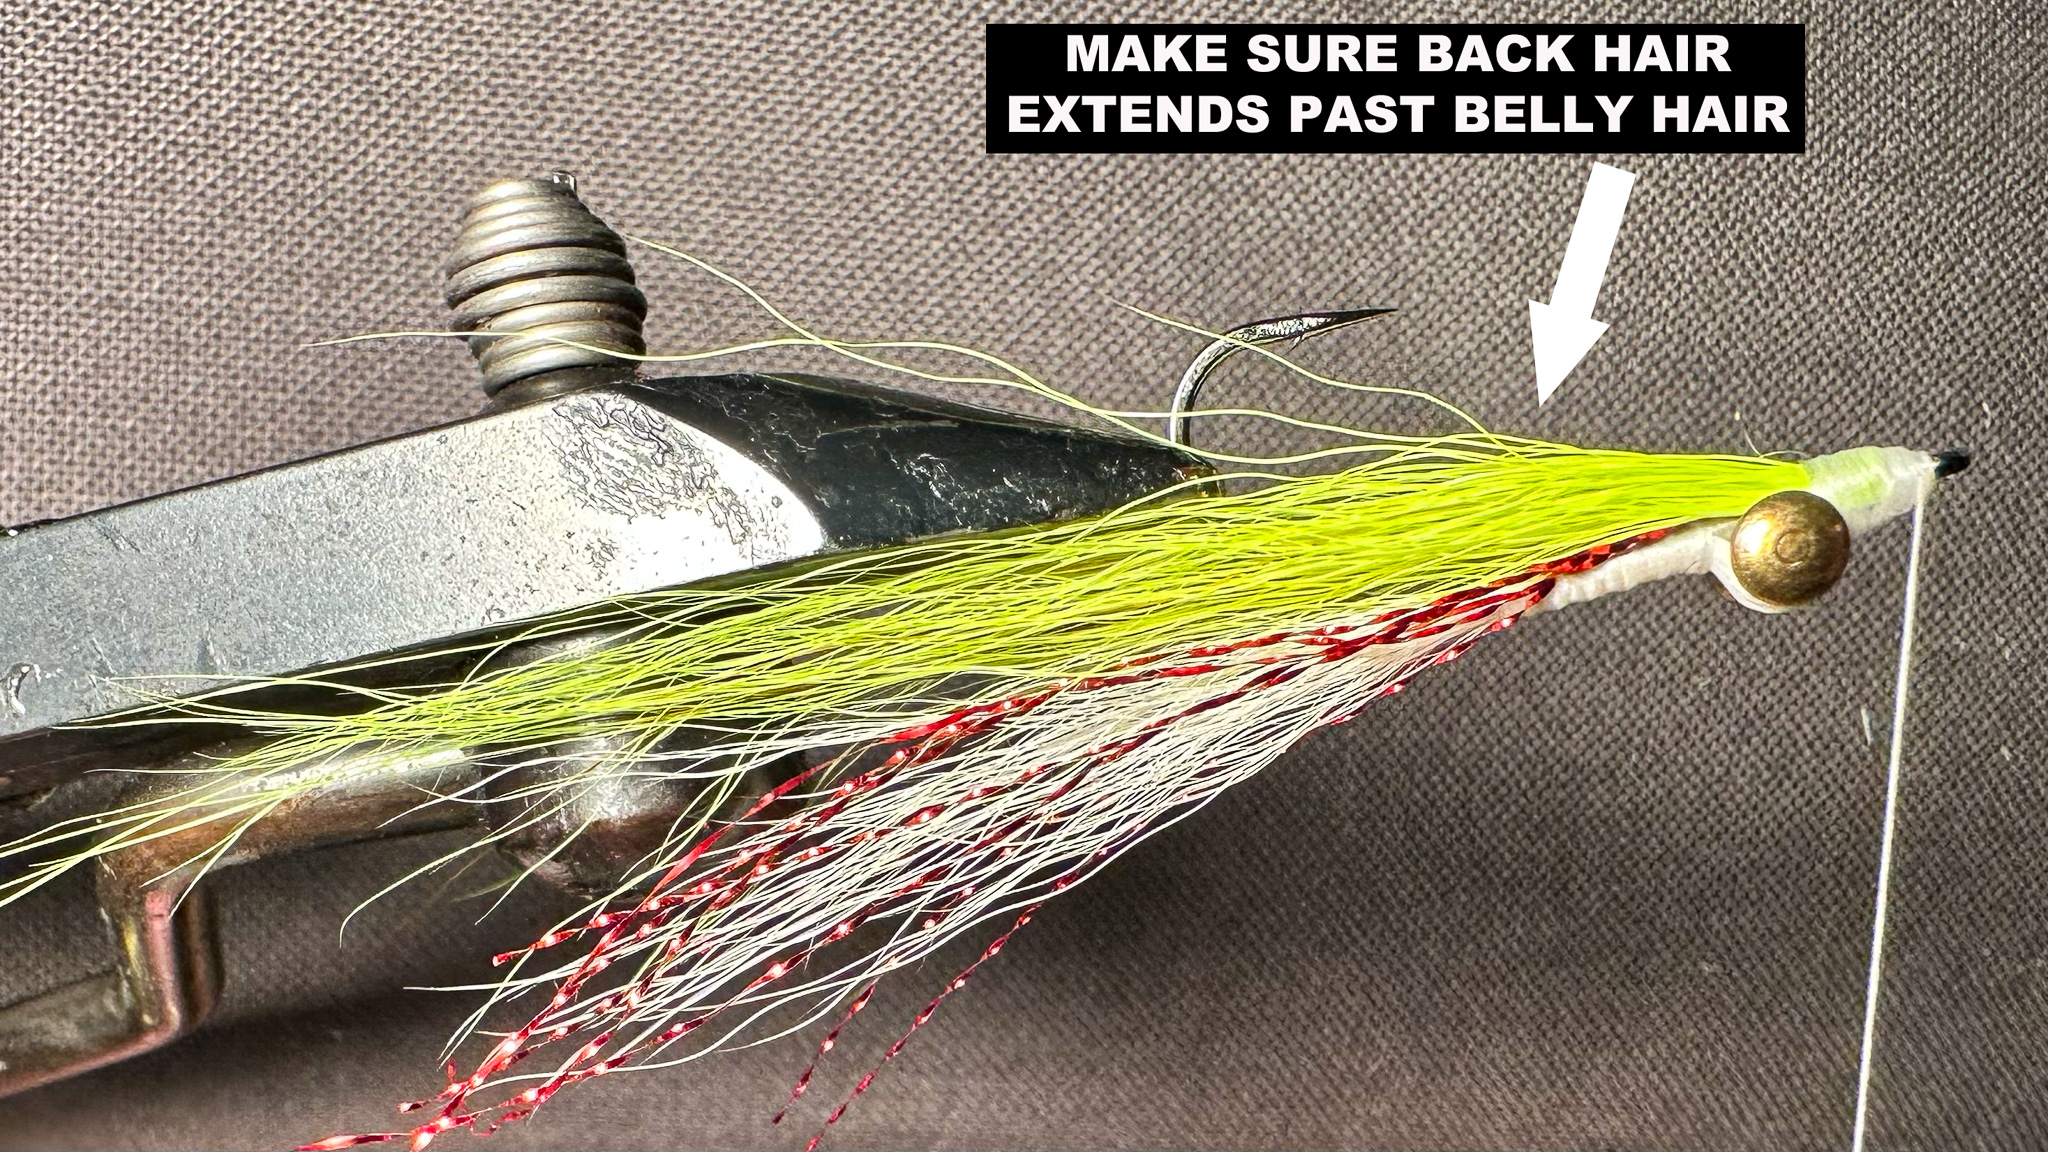 Tying a Purple and Chartreuse Crappie Jig - Step by Step Tutorial